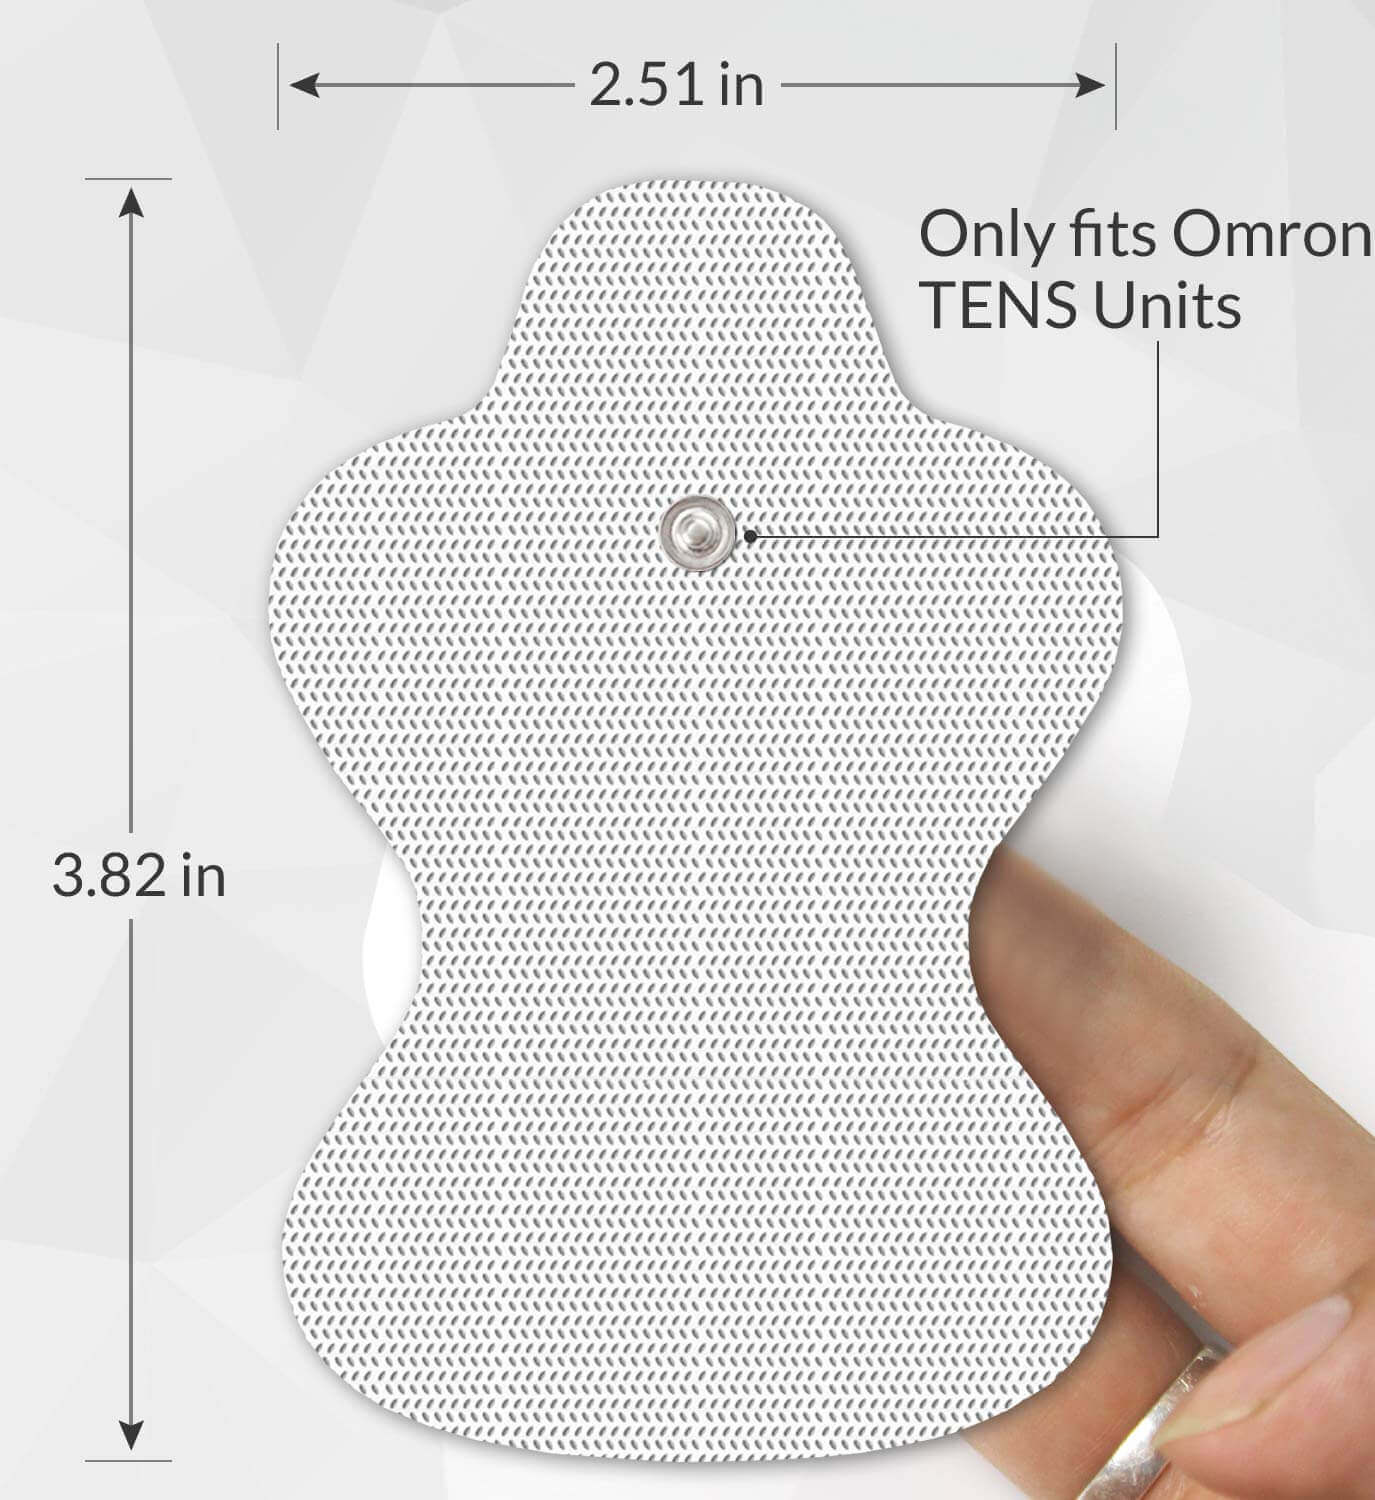 Omron Compatible Replacement Pads for TENS Unit - 10 Pcs - only fits Omron TENS units